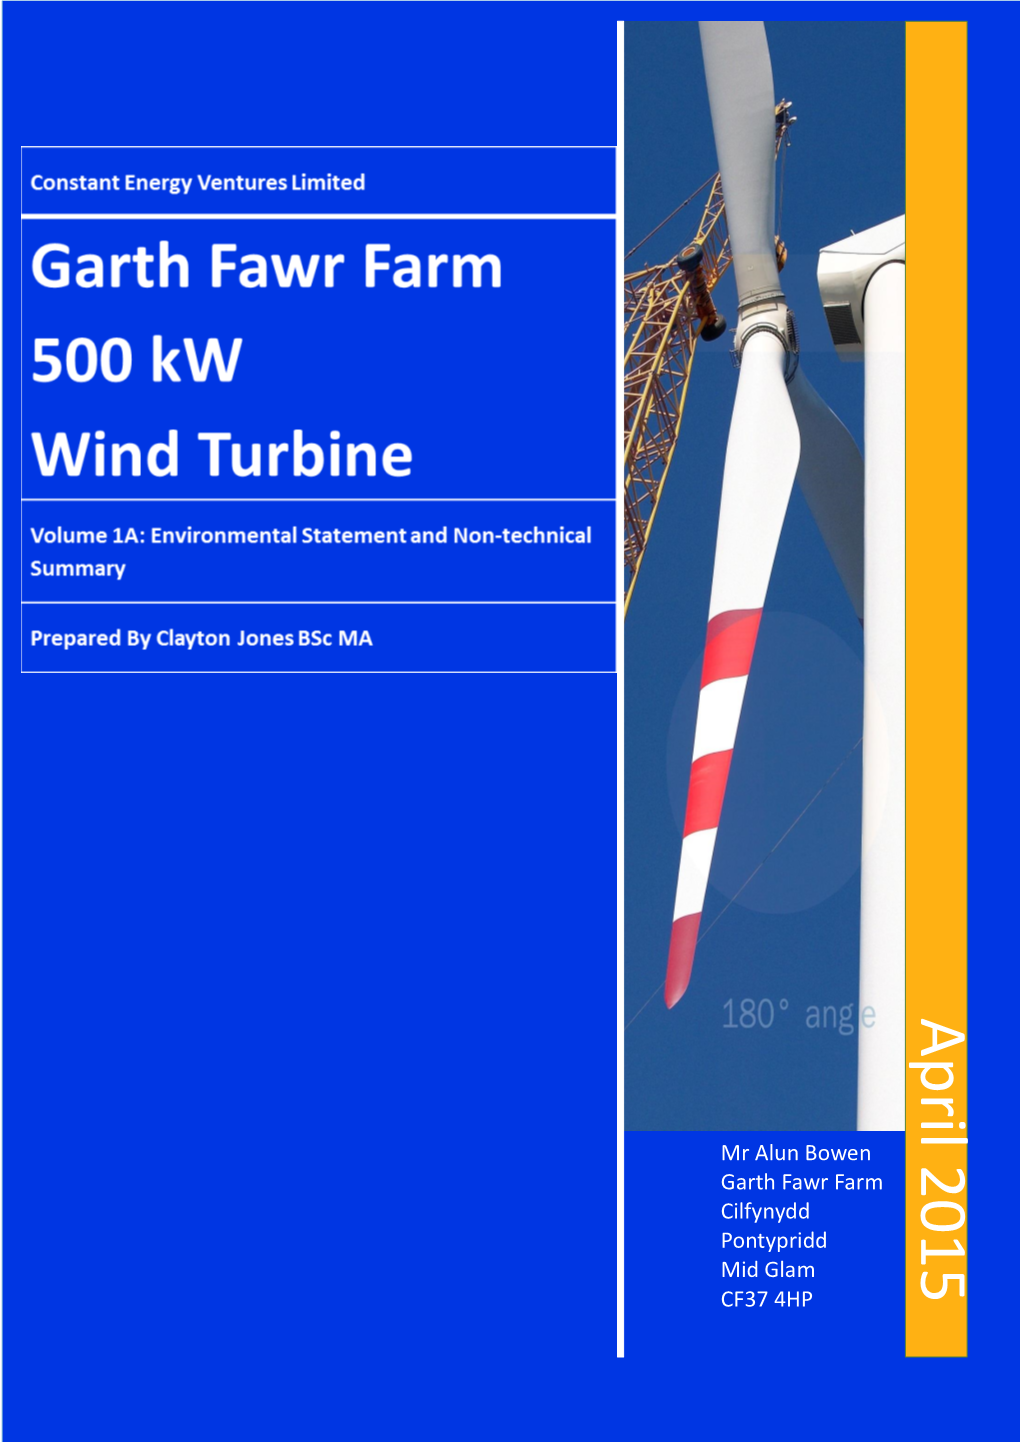 Garth Farm Wind Turbine, Located Approximately 3Km South East of Abercynon and 3.5Km South West of Nelson in the County of Mid Glamorgan